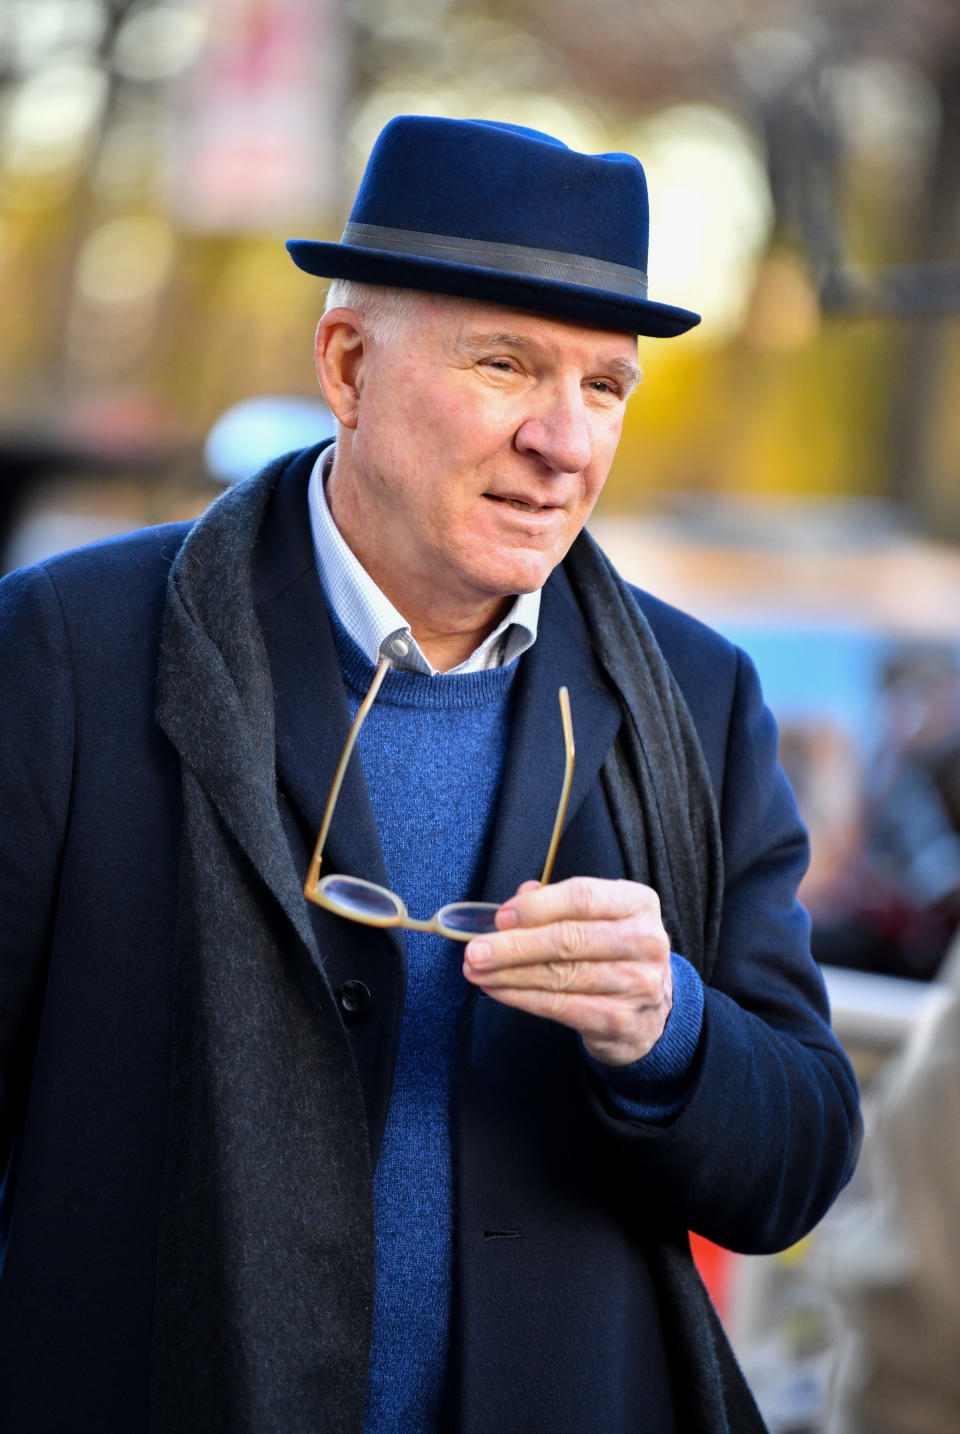 Steve Martin seen on the set of 'Only Murders in the Building' on the Upper West Side. December 2020. / Credit: James Devaney/Getty Images